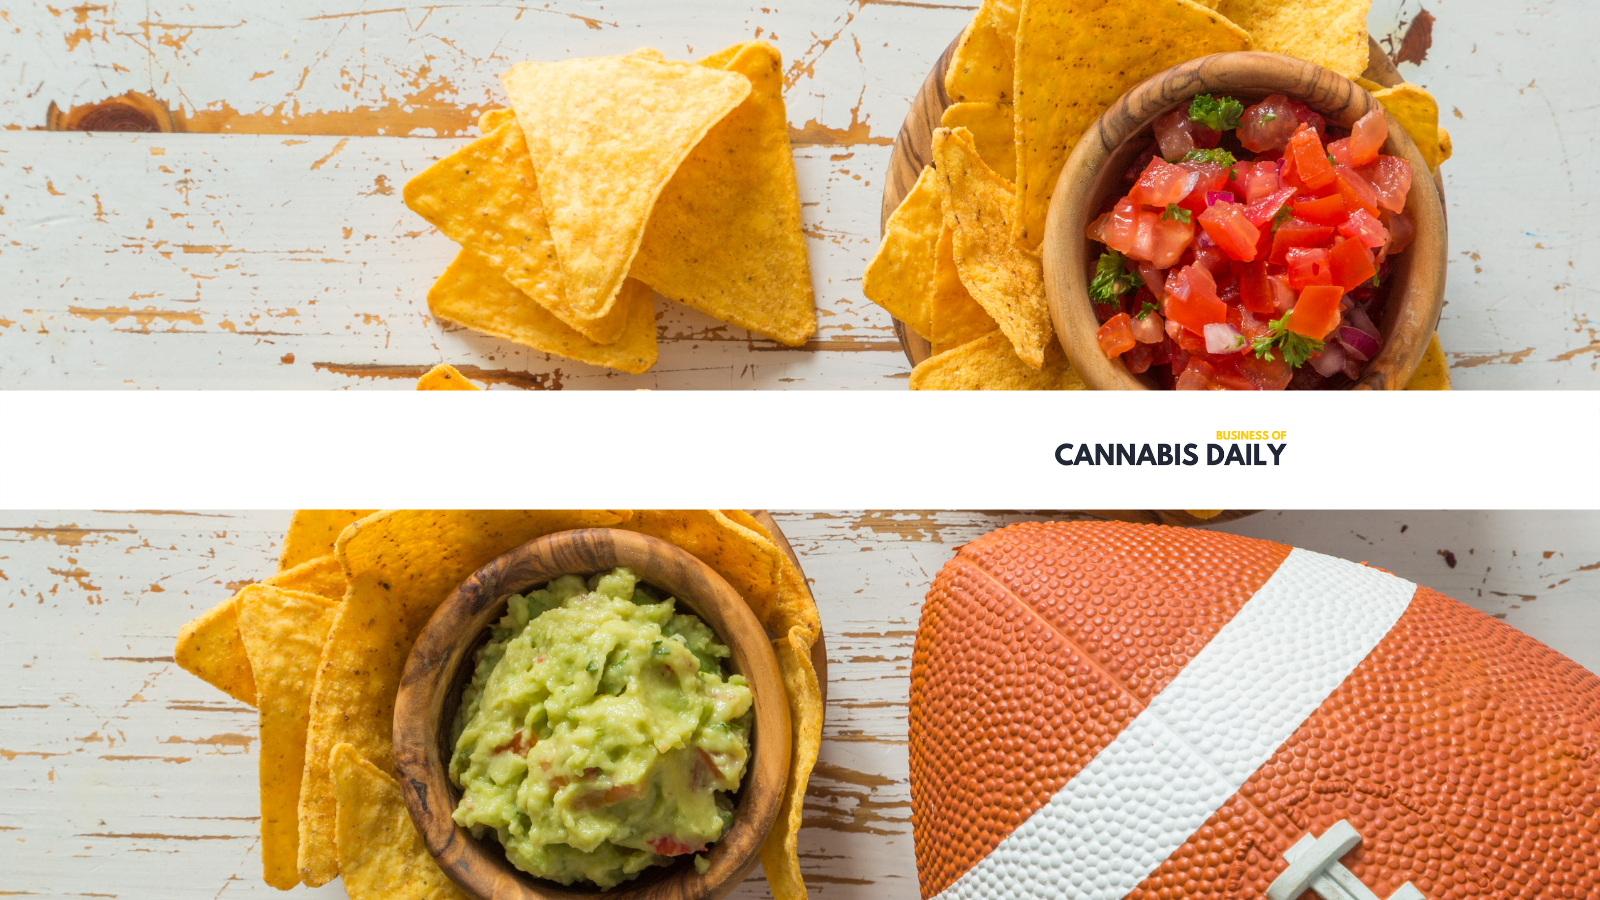 super bowl ads in the cannabis news